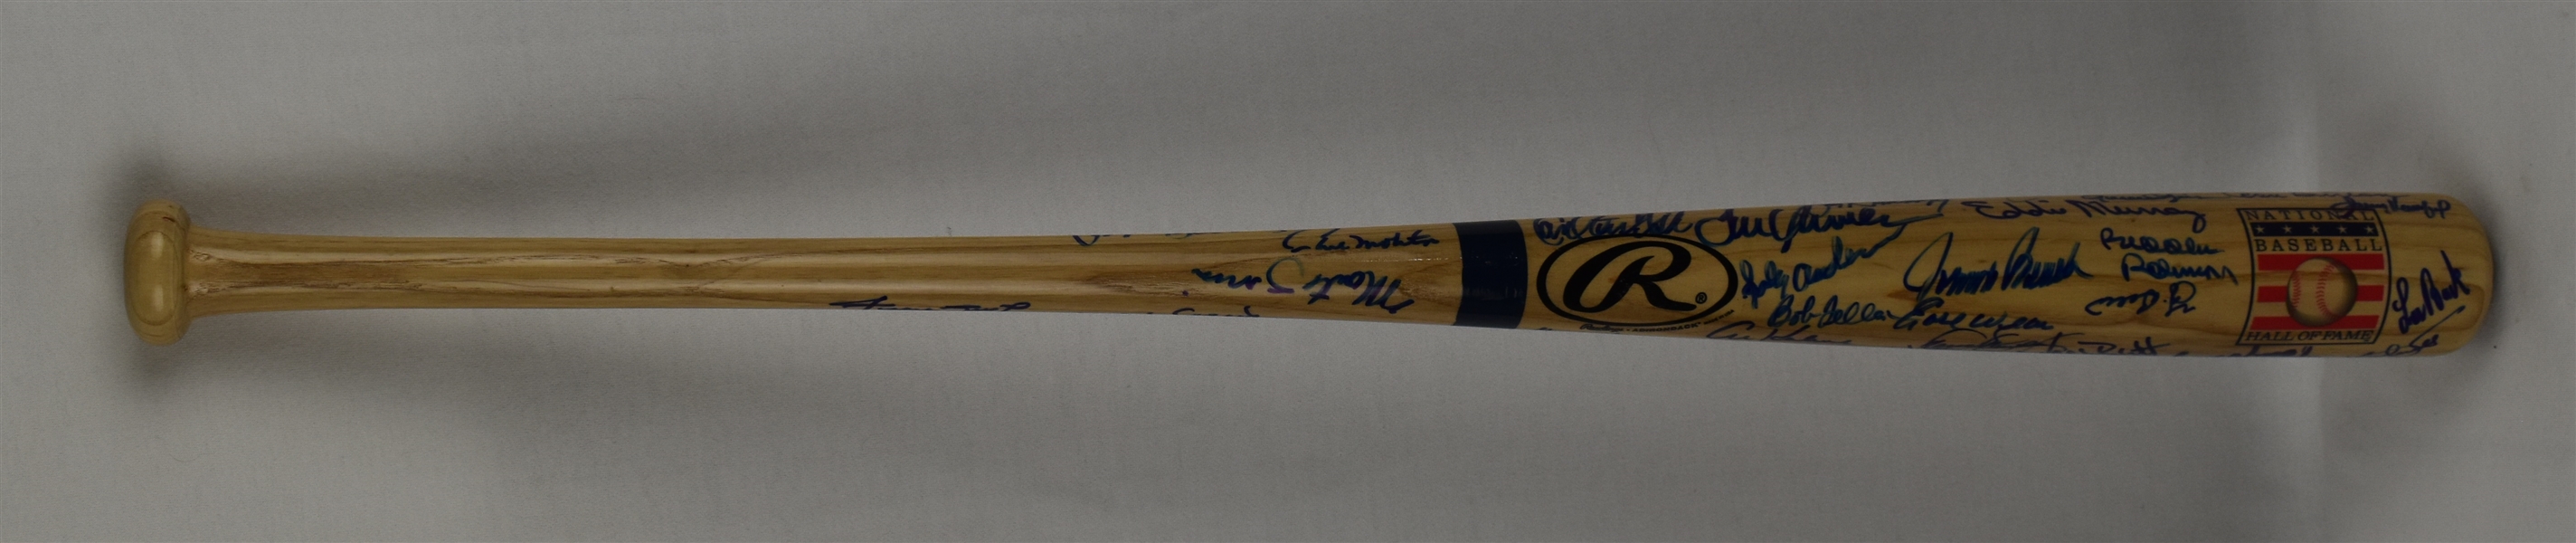 Hall of Fame Autographed Bat w/Kirby Puckett & Willie Mays w/Puckett Family Provenance  